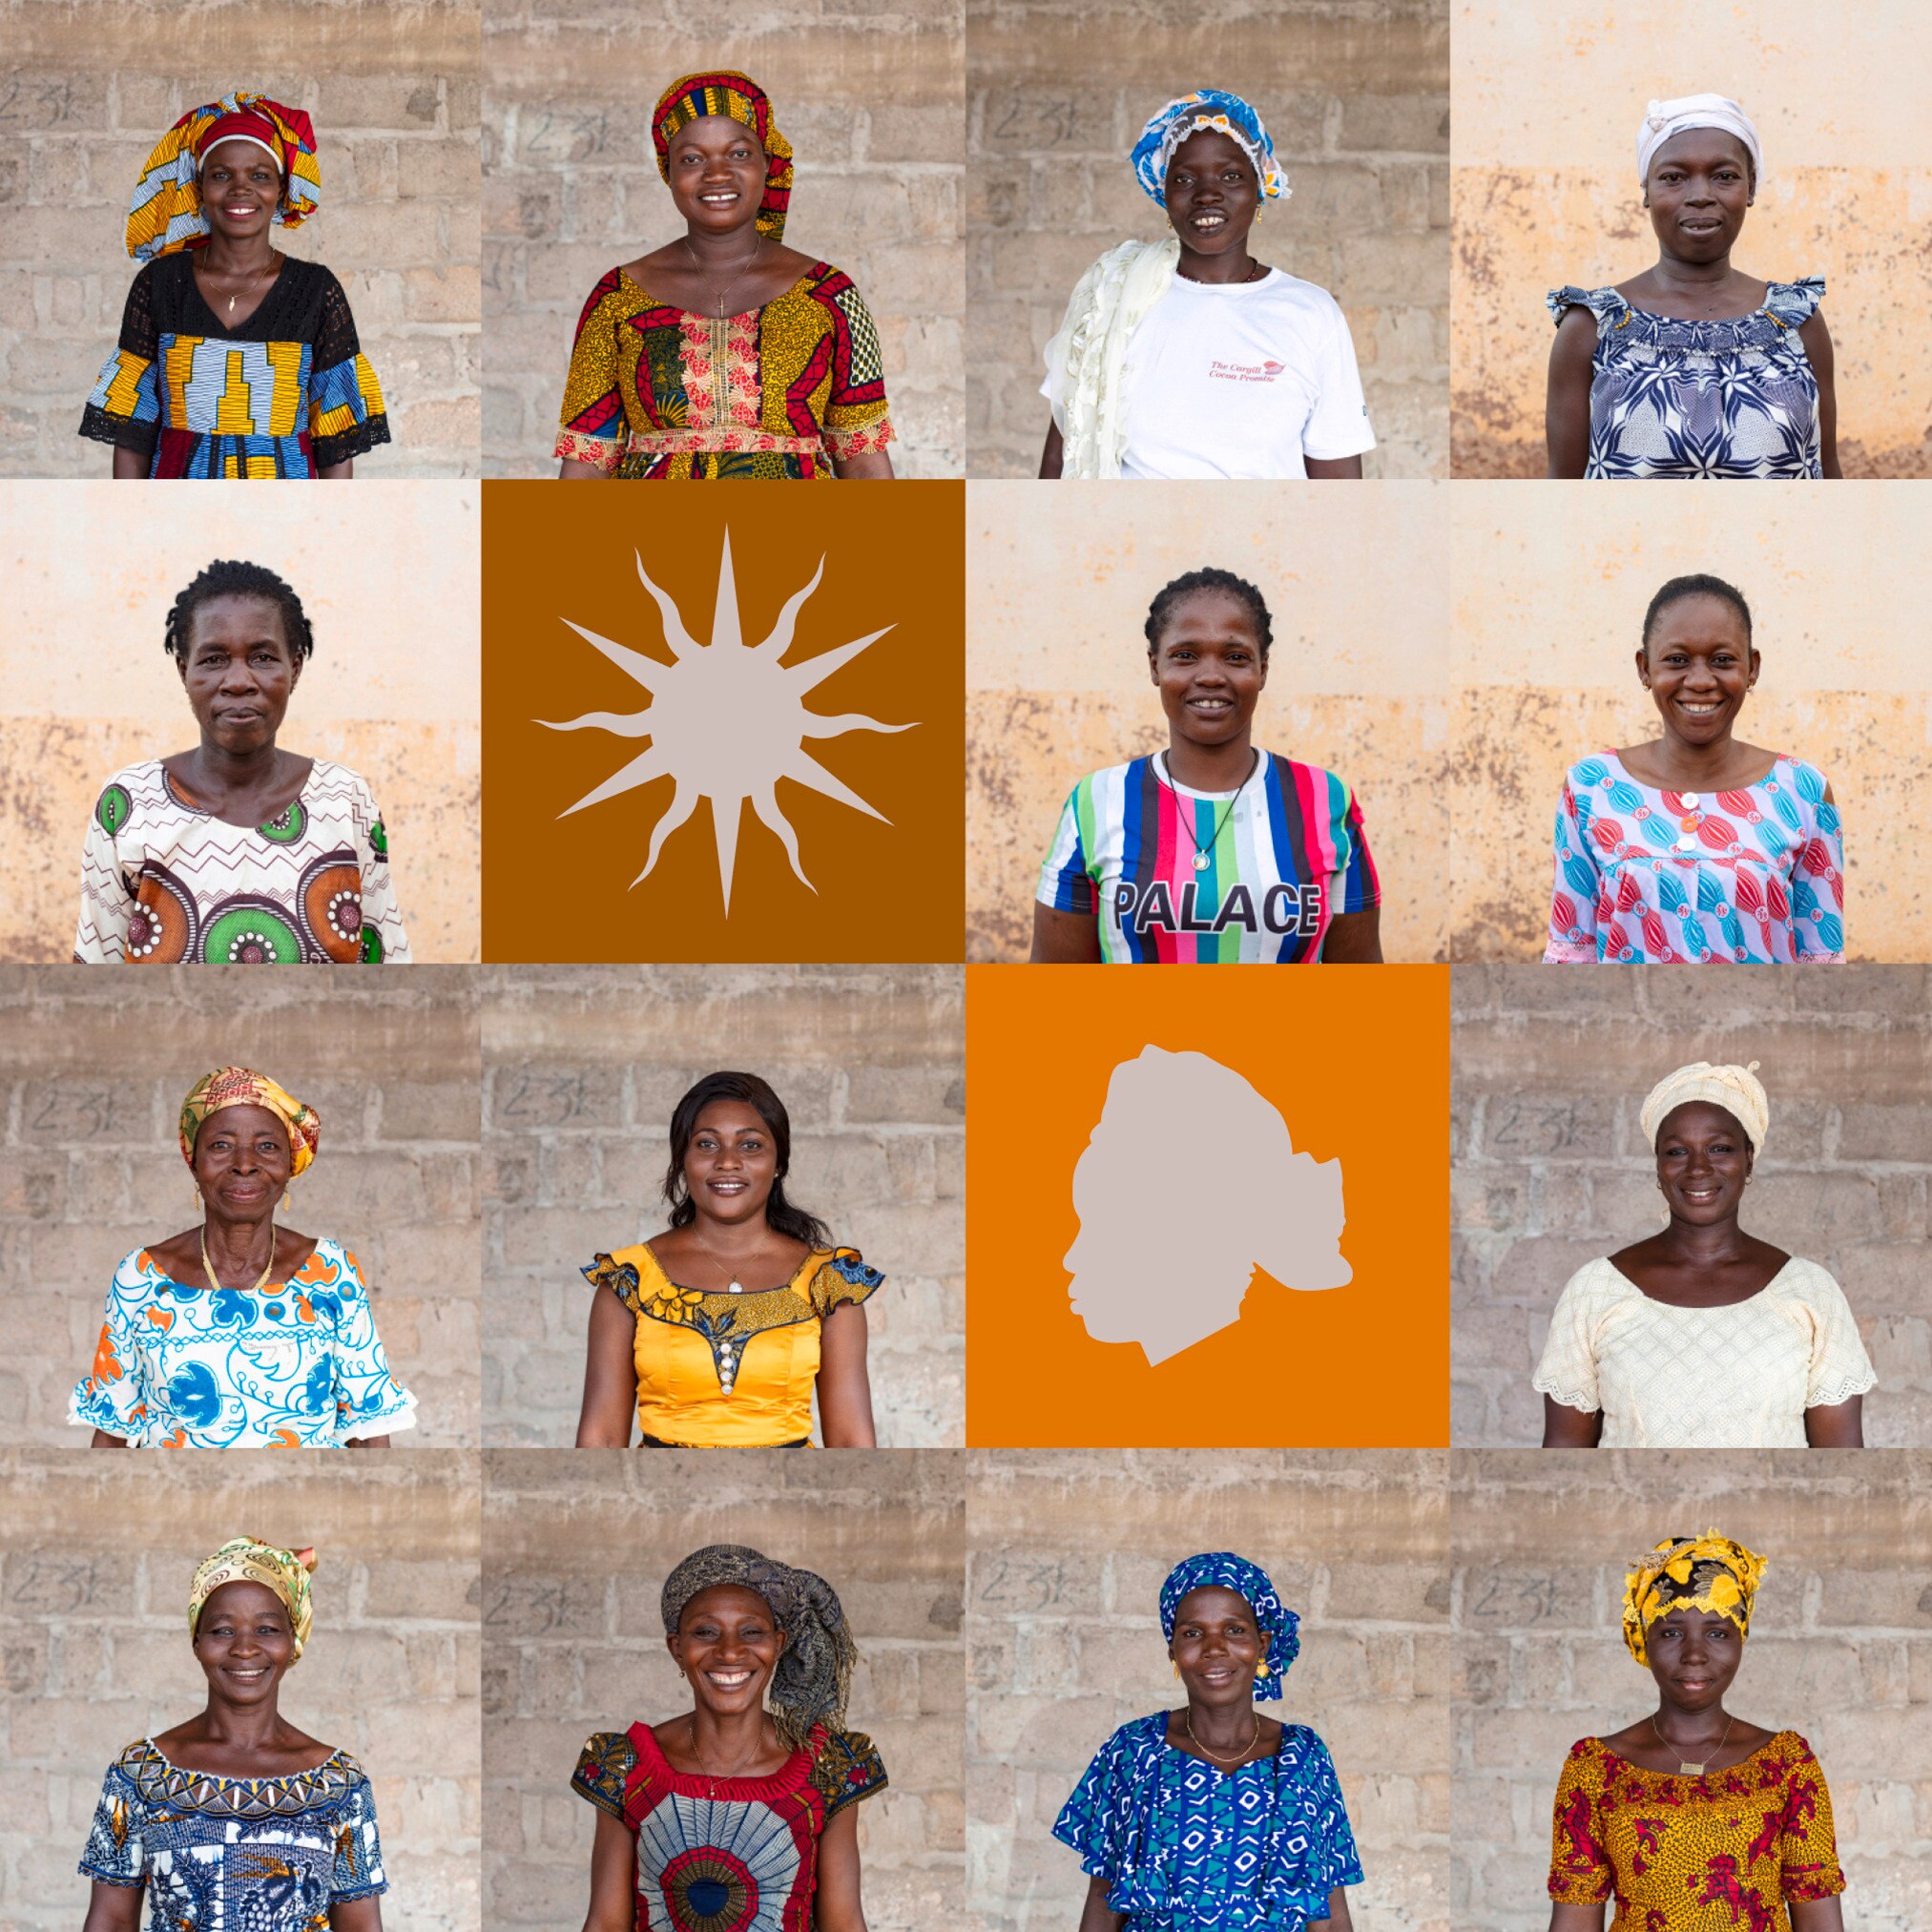 grid of 14 smiling african women portraits #6 - interspersed with a few colourful graphic square cut out illustrations